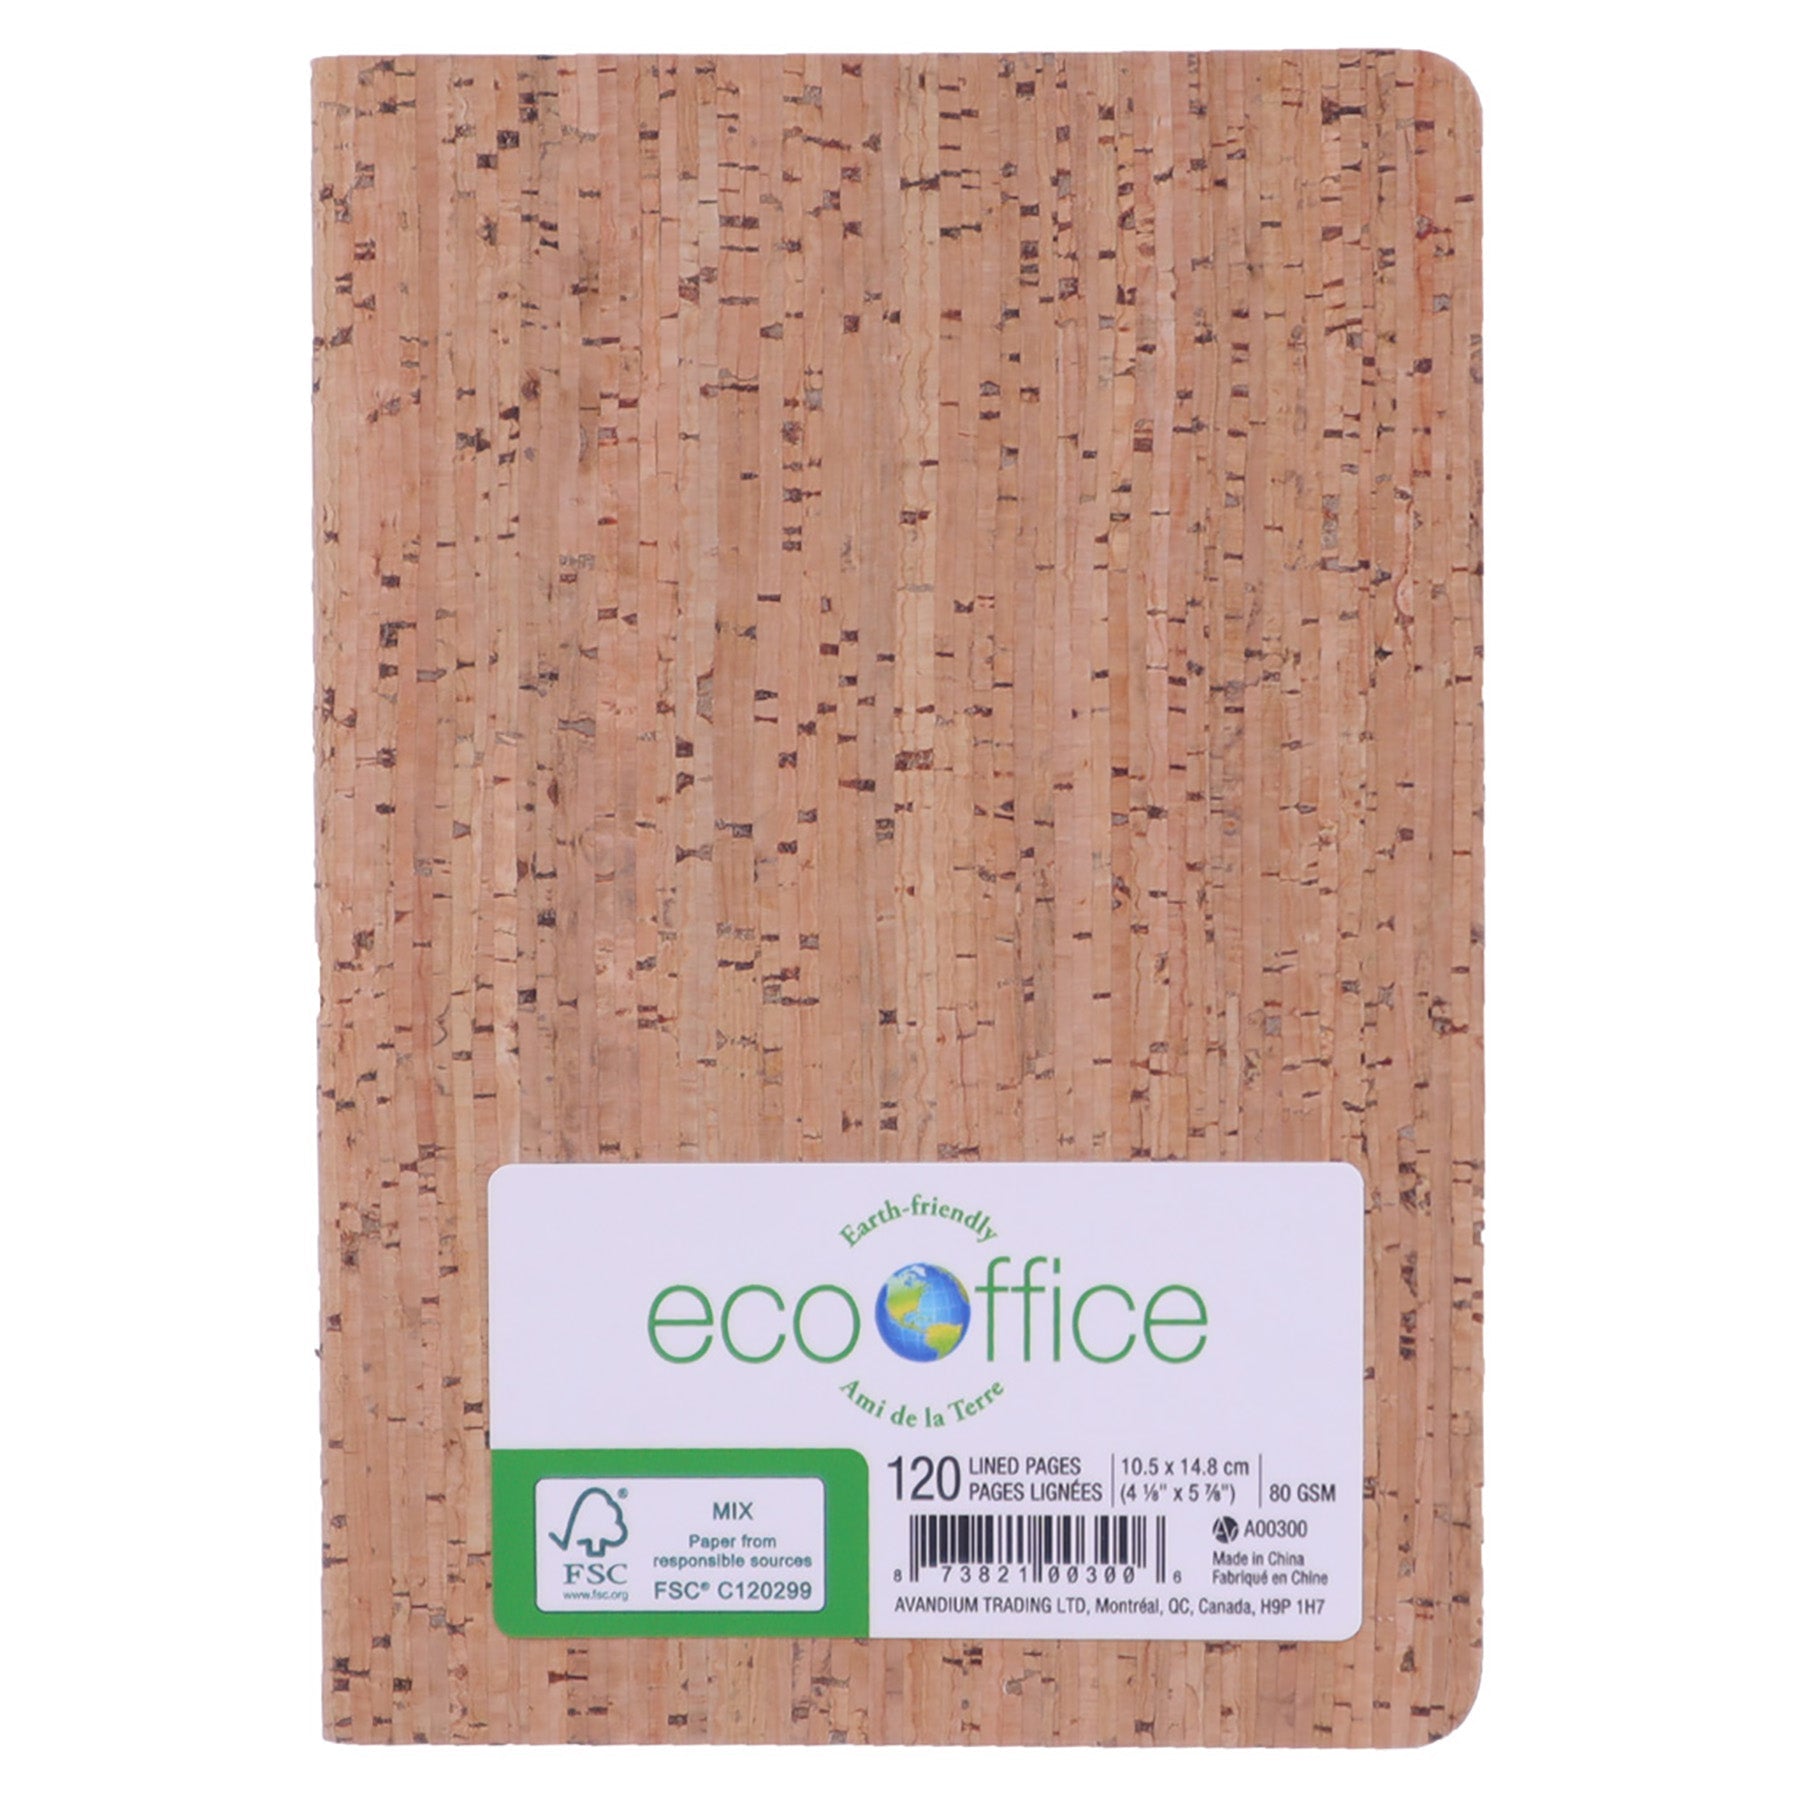 EcoOffice 100% Recycled Cork Cover Notebook A6 120 Lined Pages 4.12x5.87in